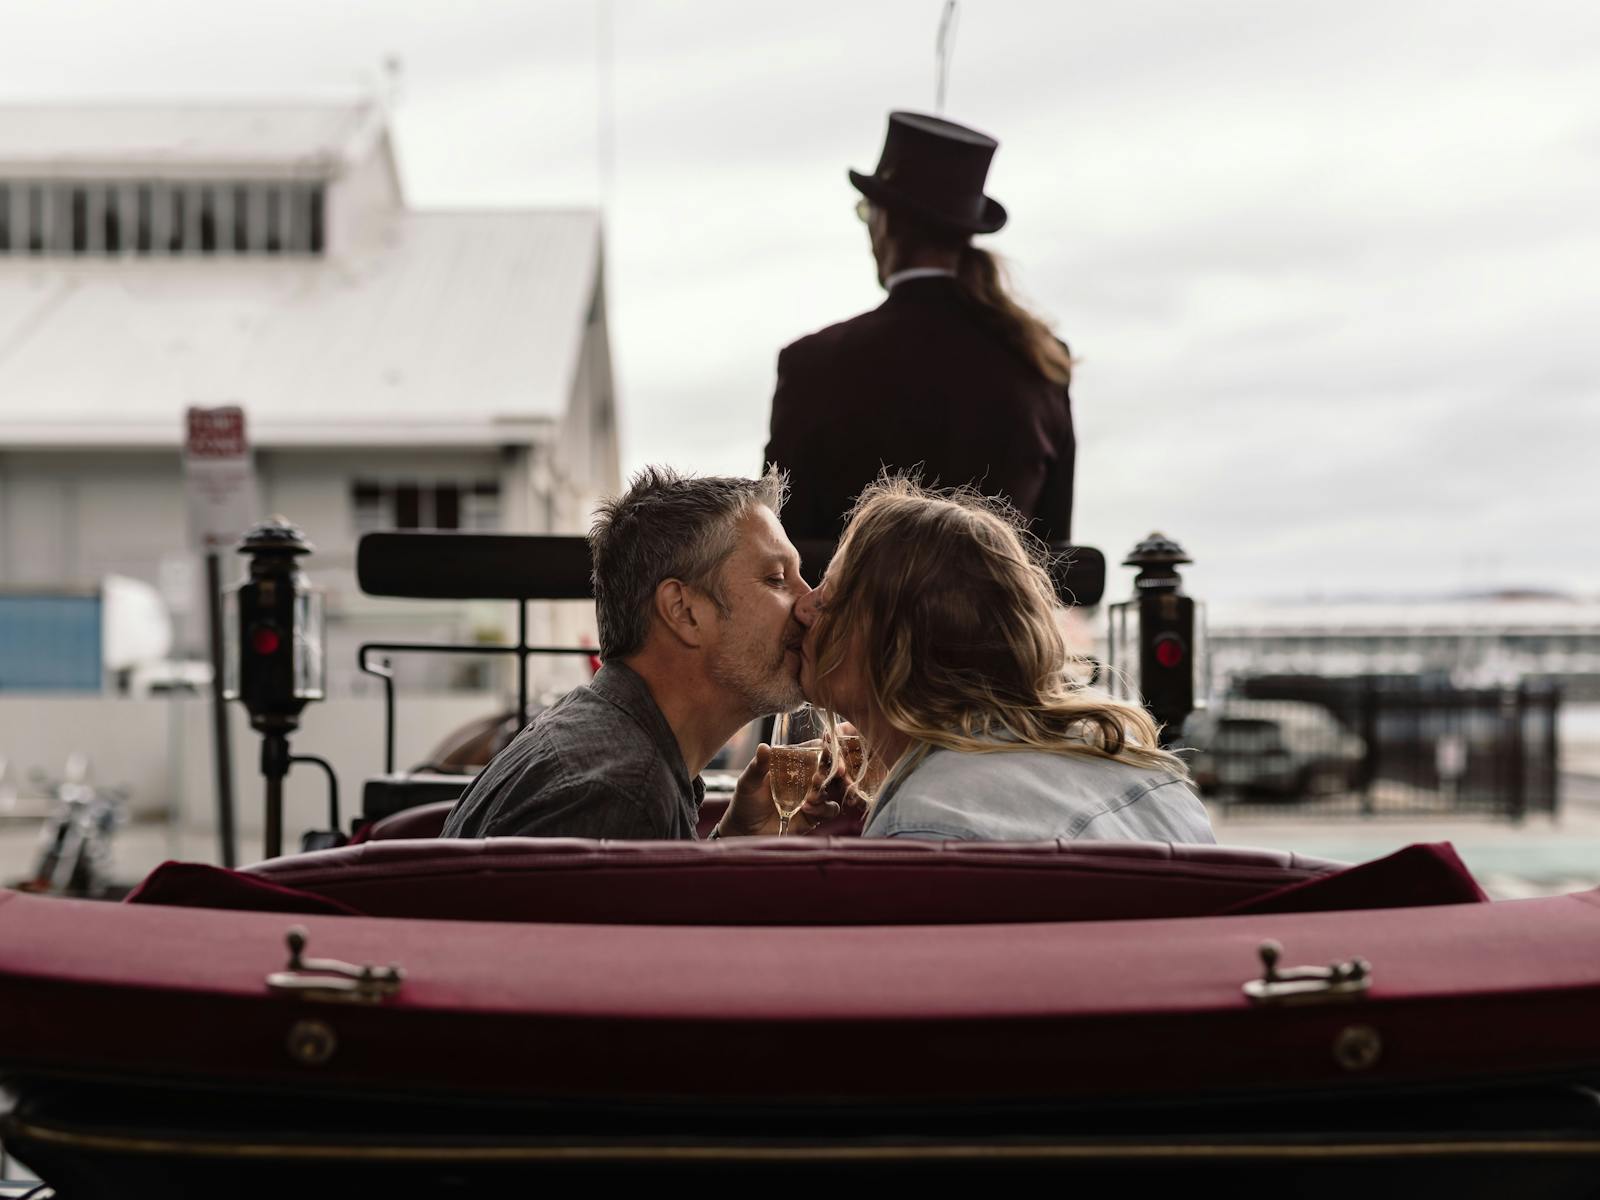 Our guests enjoy the romantic atmosphere of a carriage ride